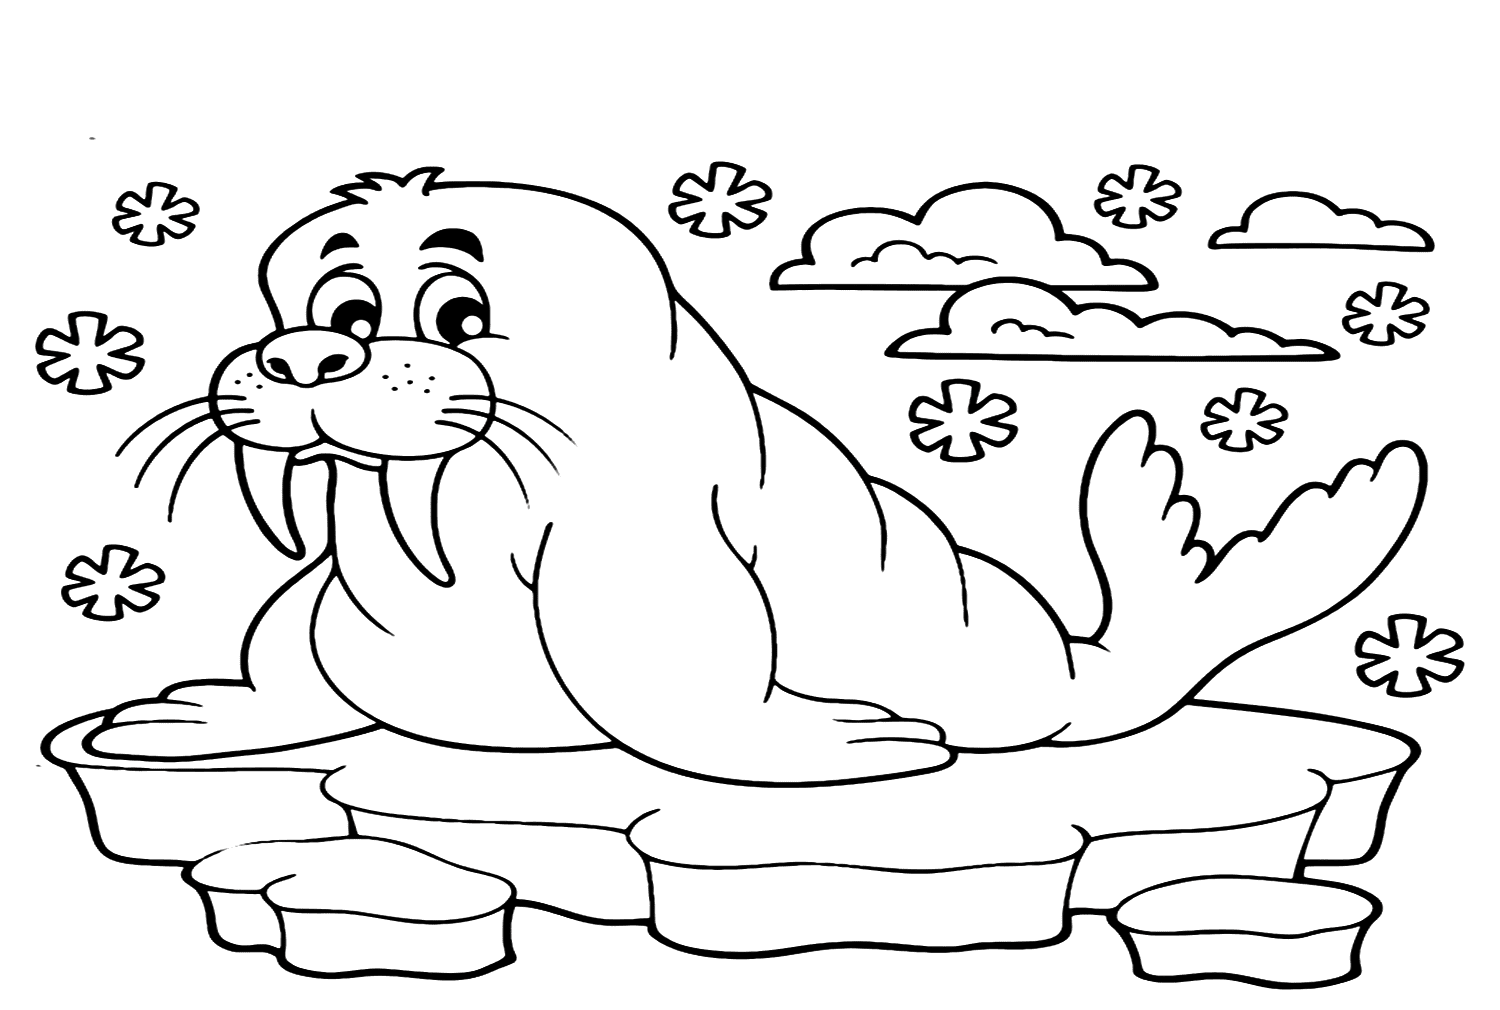 Cute Walrus Coloring Pages